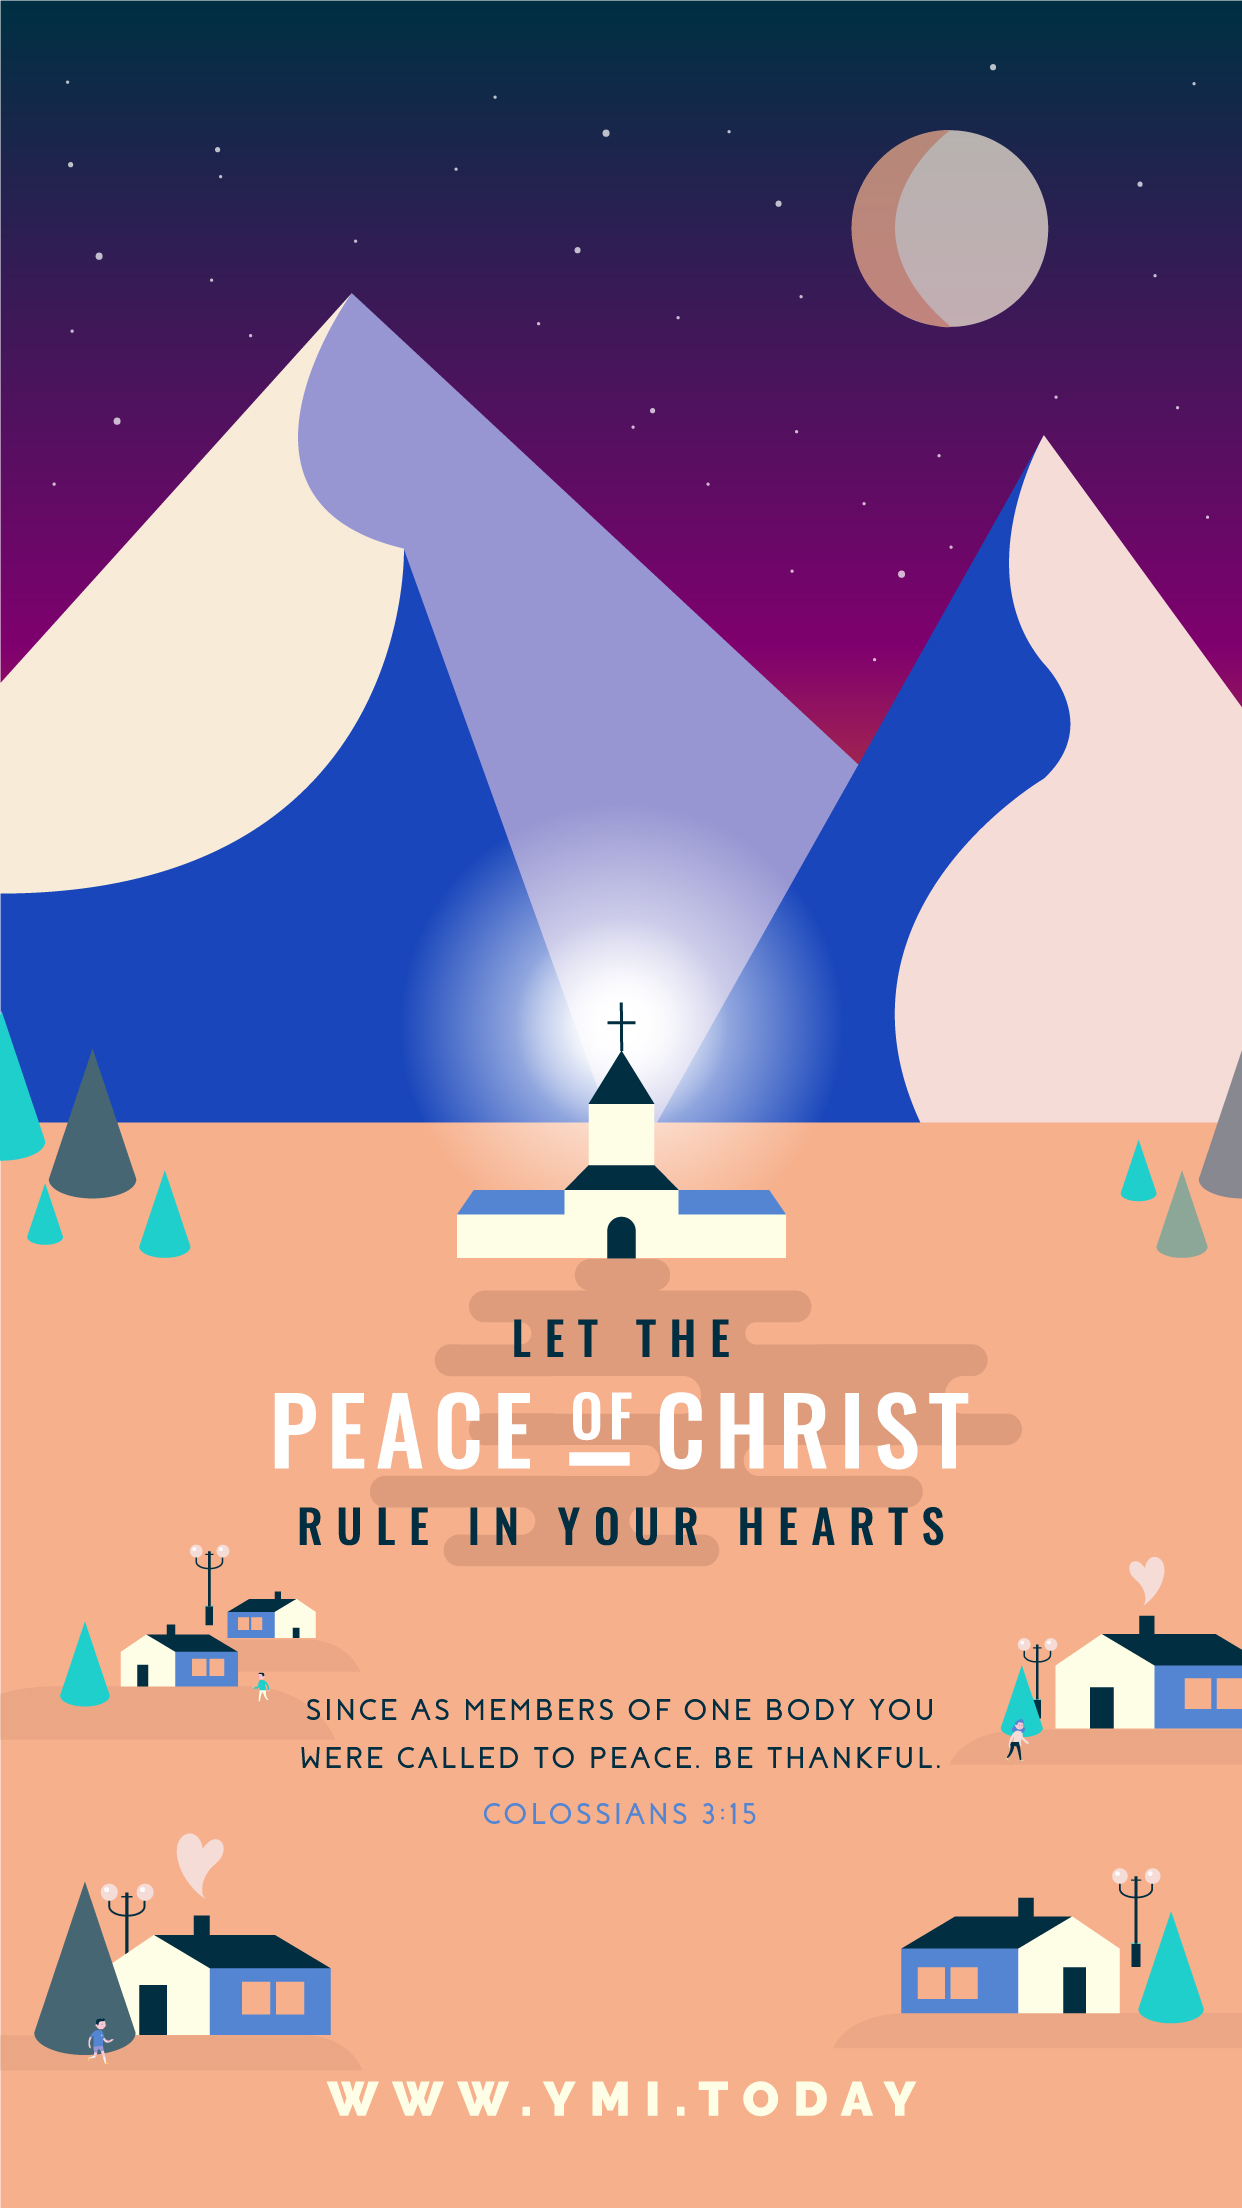 YMI May 2016 Phone Lockscreen - Let the peace of Christ rule in your hearts, since as members of one body you were called to peace. Be Thankful. - Colossians 3:15